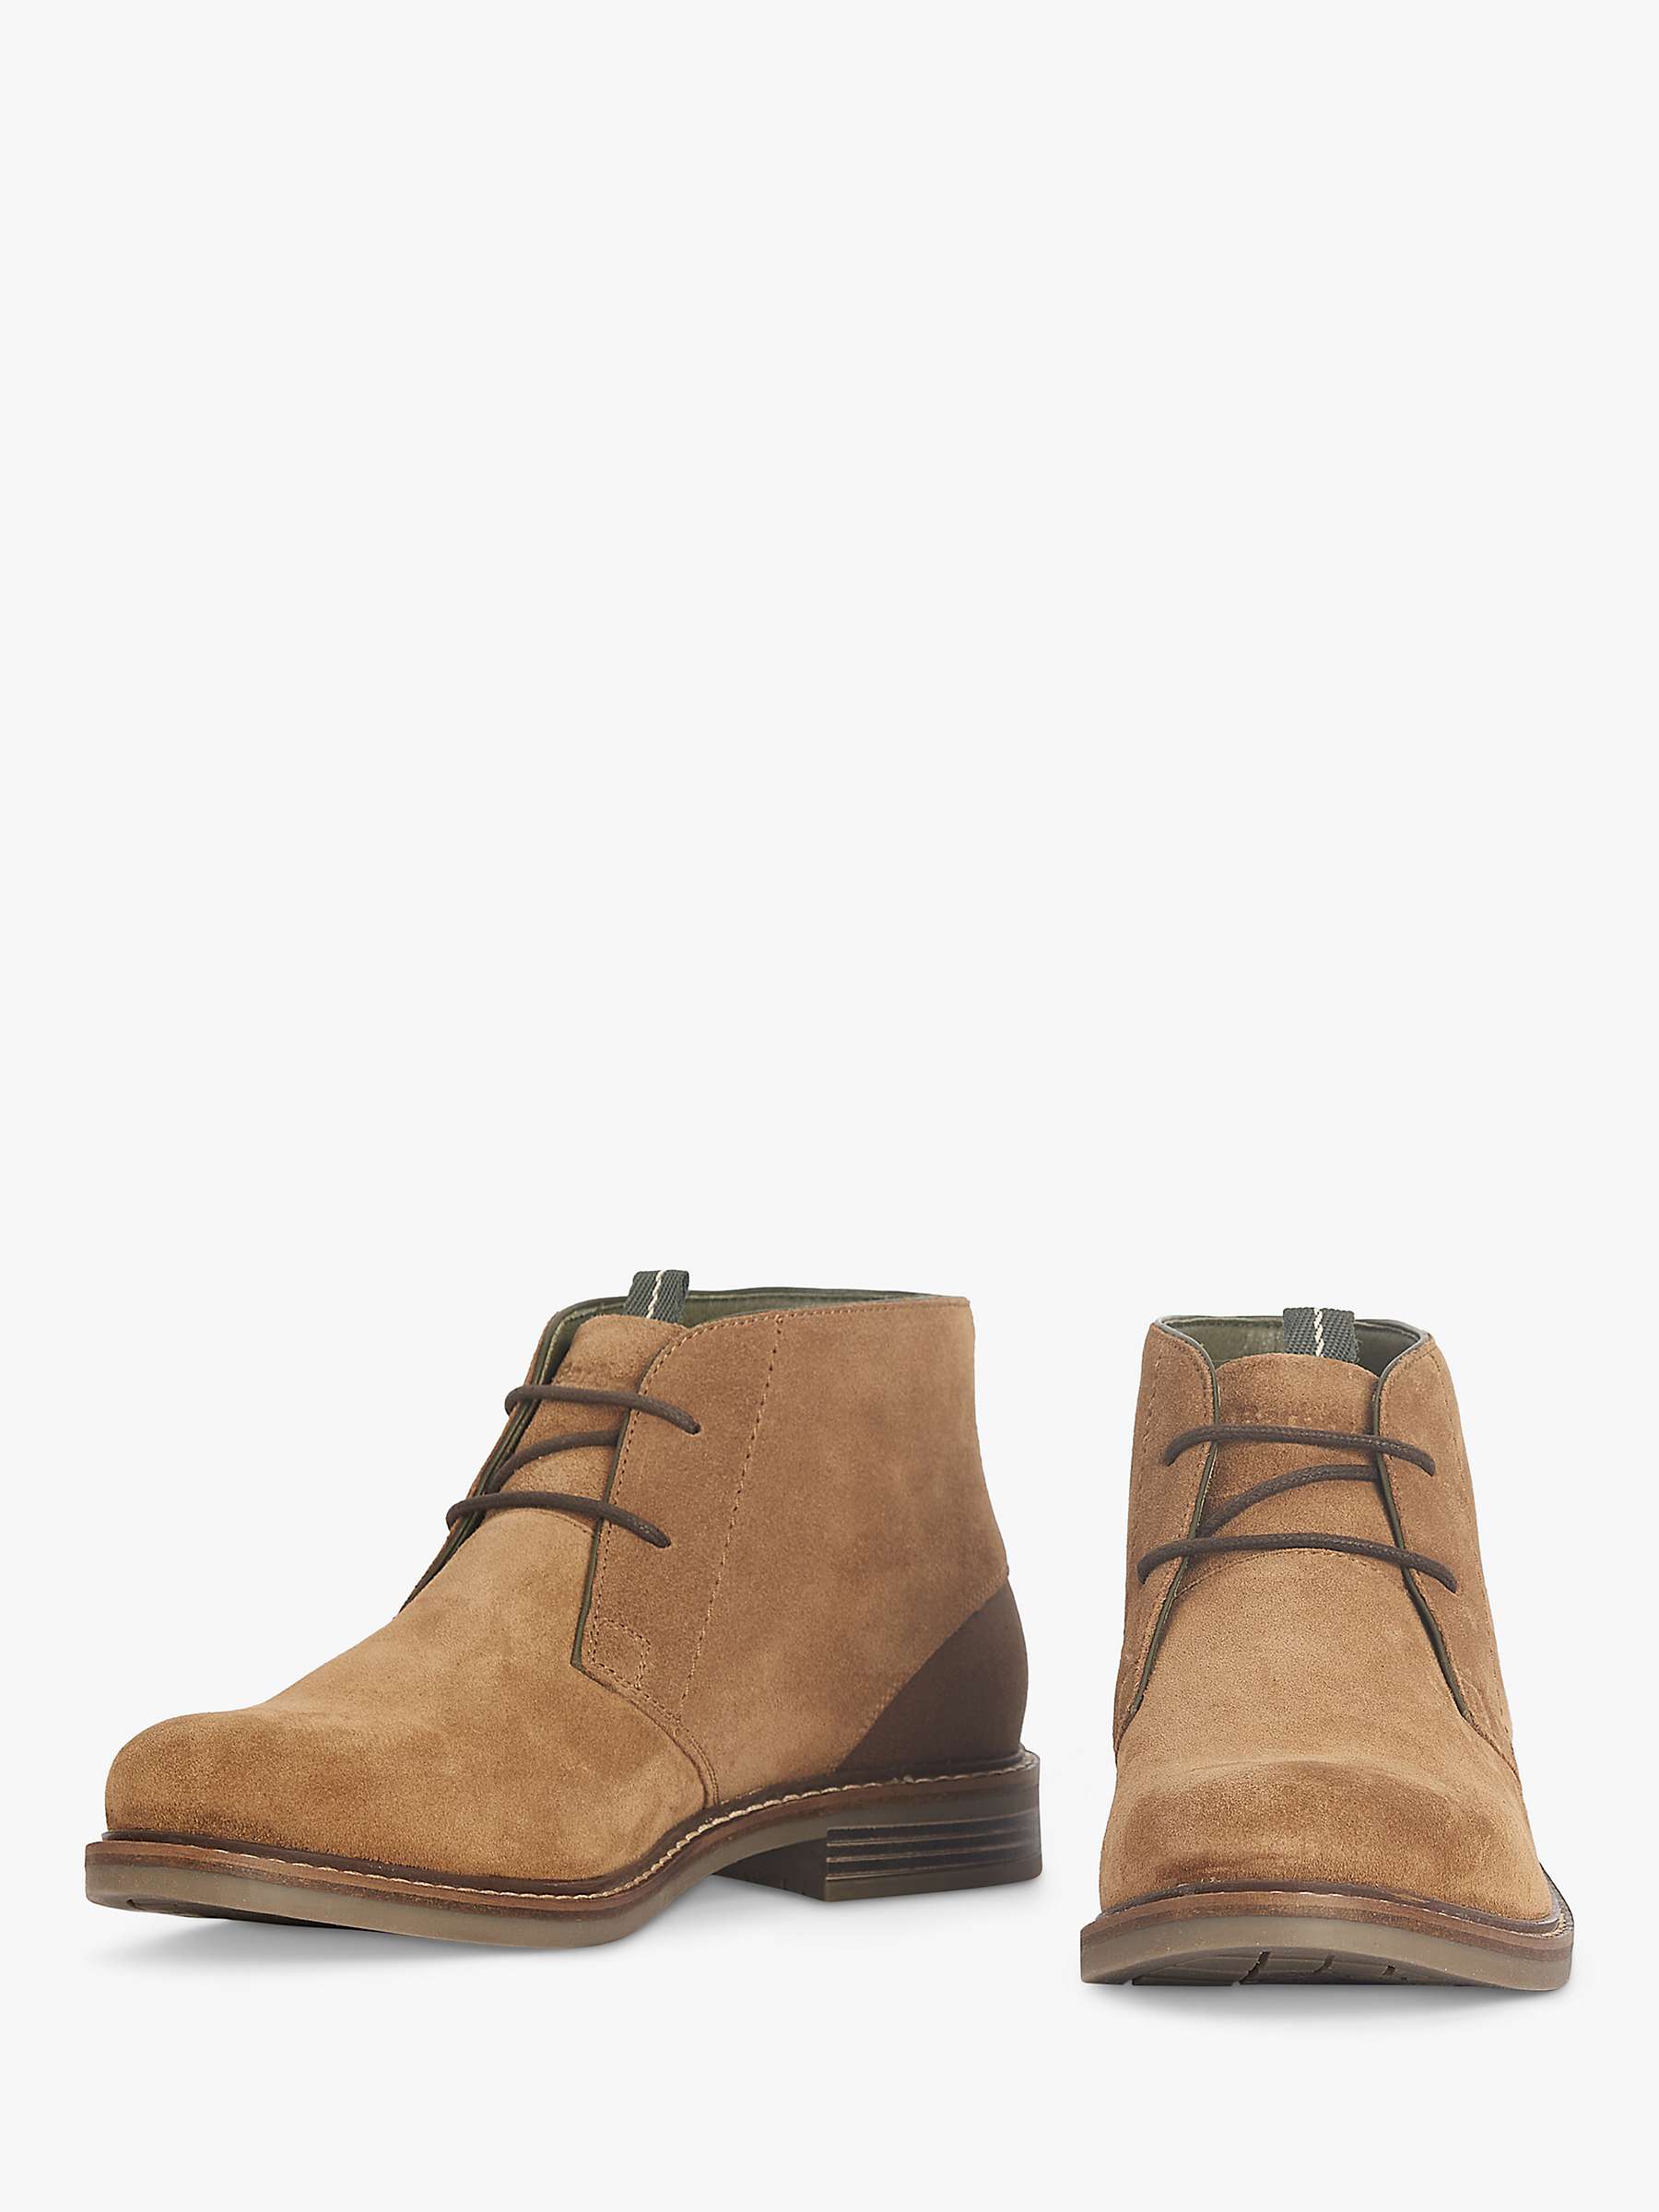 Buy Barbour Readhead Chukka Fawn Suede Boots, Fawn Suede Online at johnlewis.com